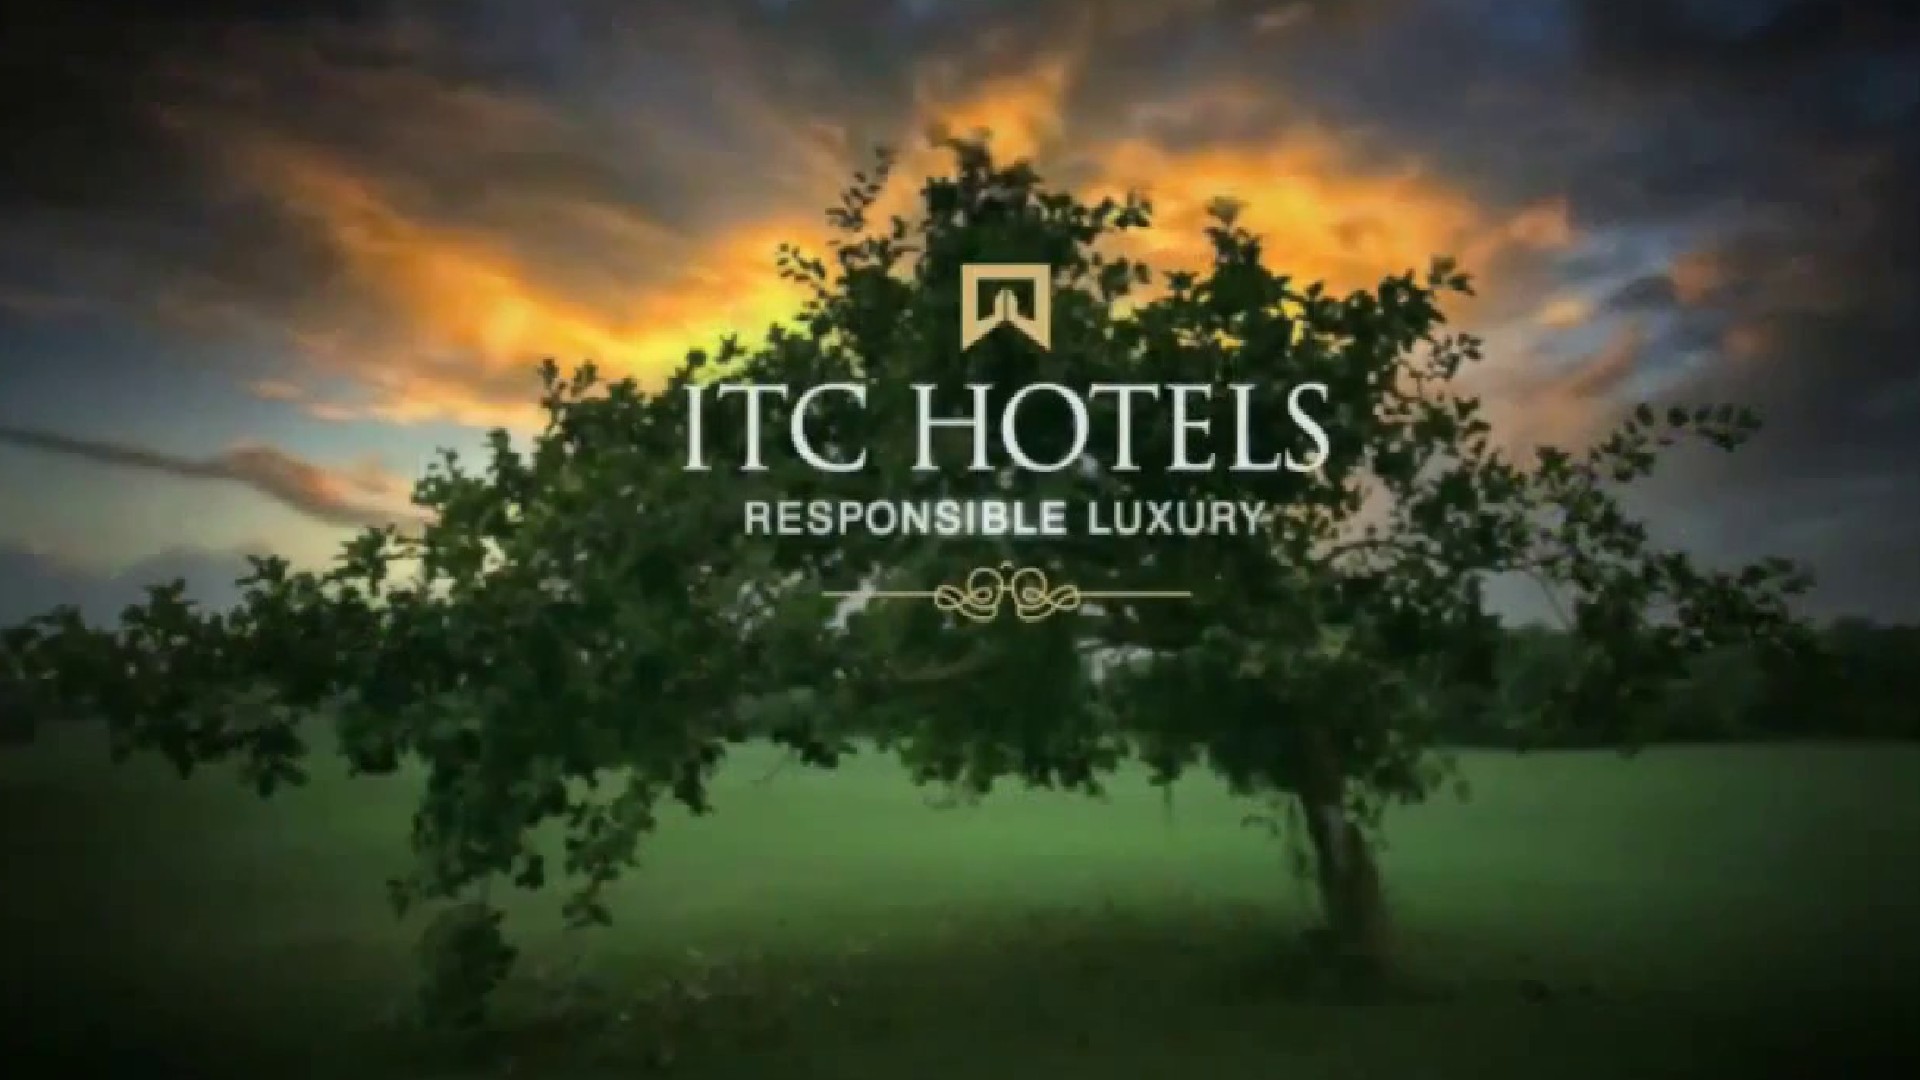 ITC Is World’s First Hotel Chain To Receive Platinum Certification For Hygiene & Safety Protocols